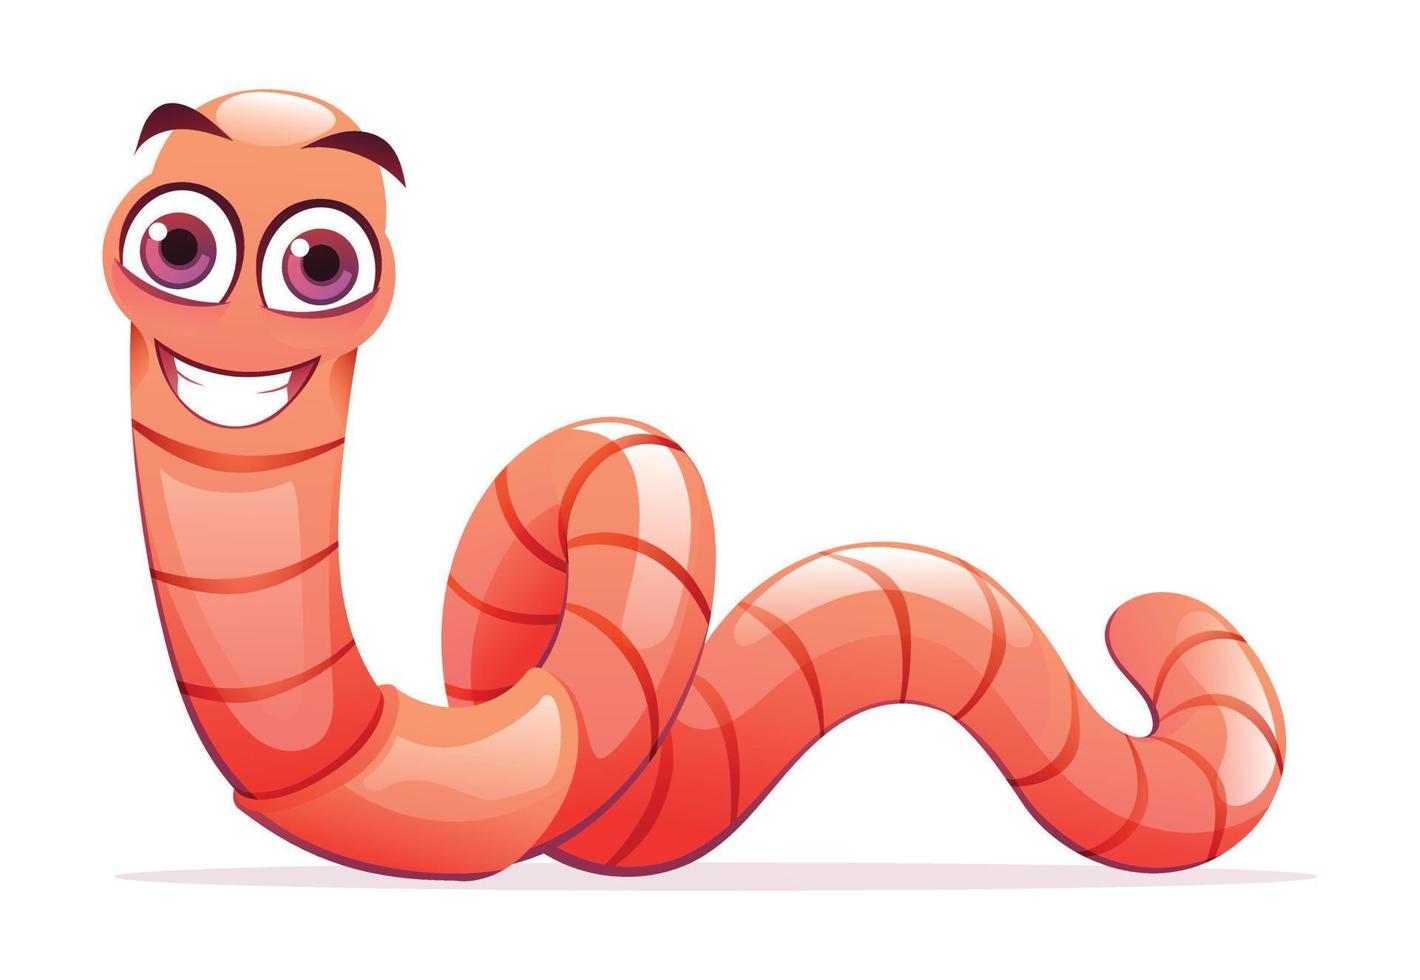 Cute worm cartoon illustration isolated on white background vector